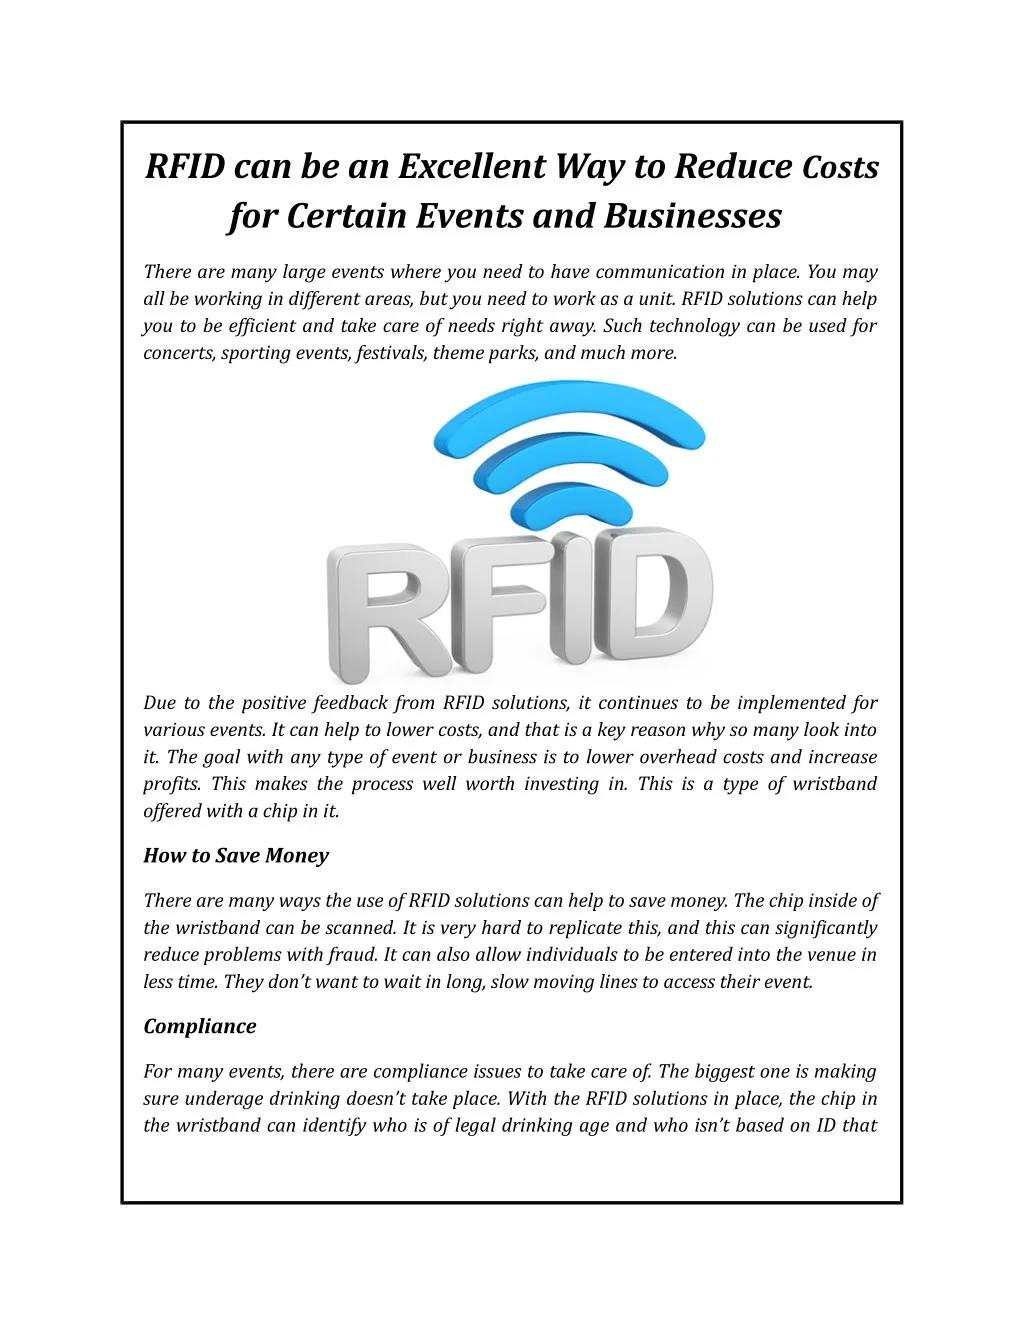 rfid can be an excellent way to reduce costs